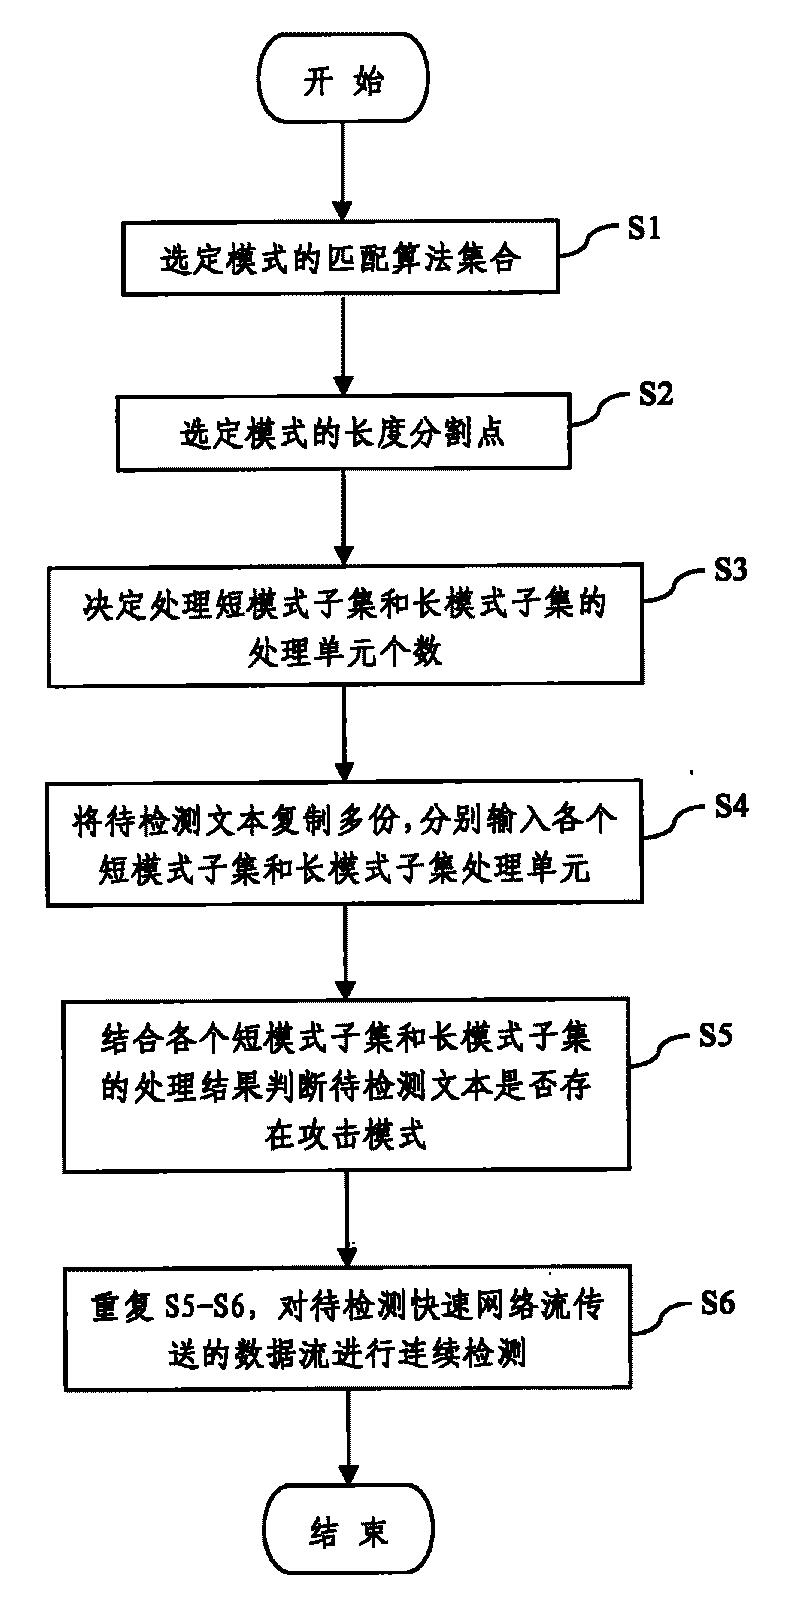 Pattern clustering-based parallel network flow characteristic detection method